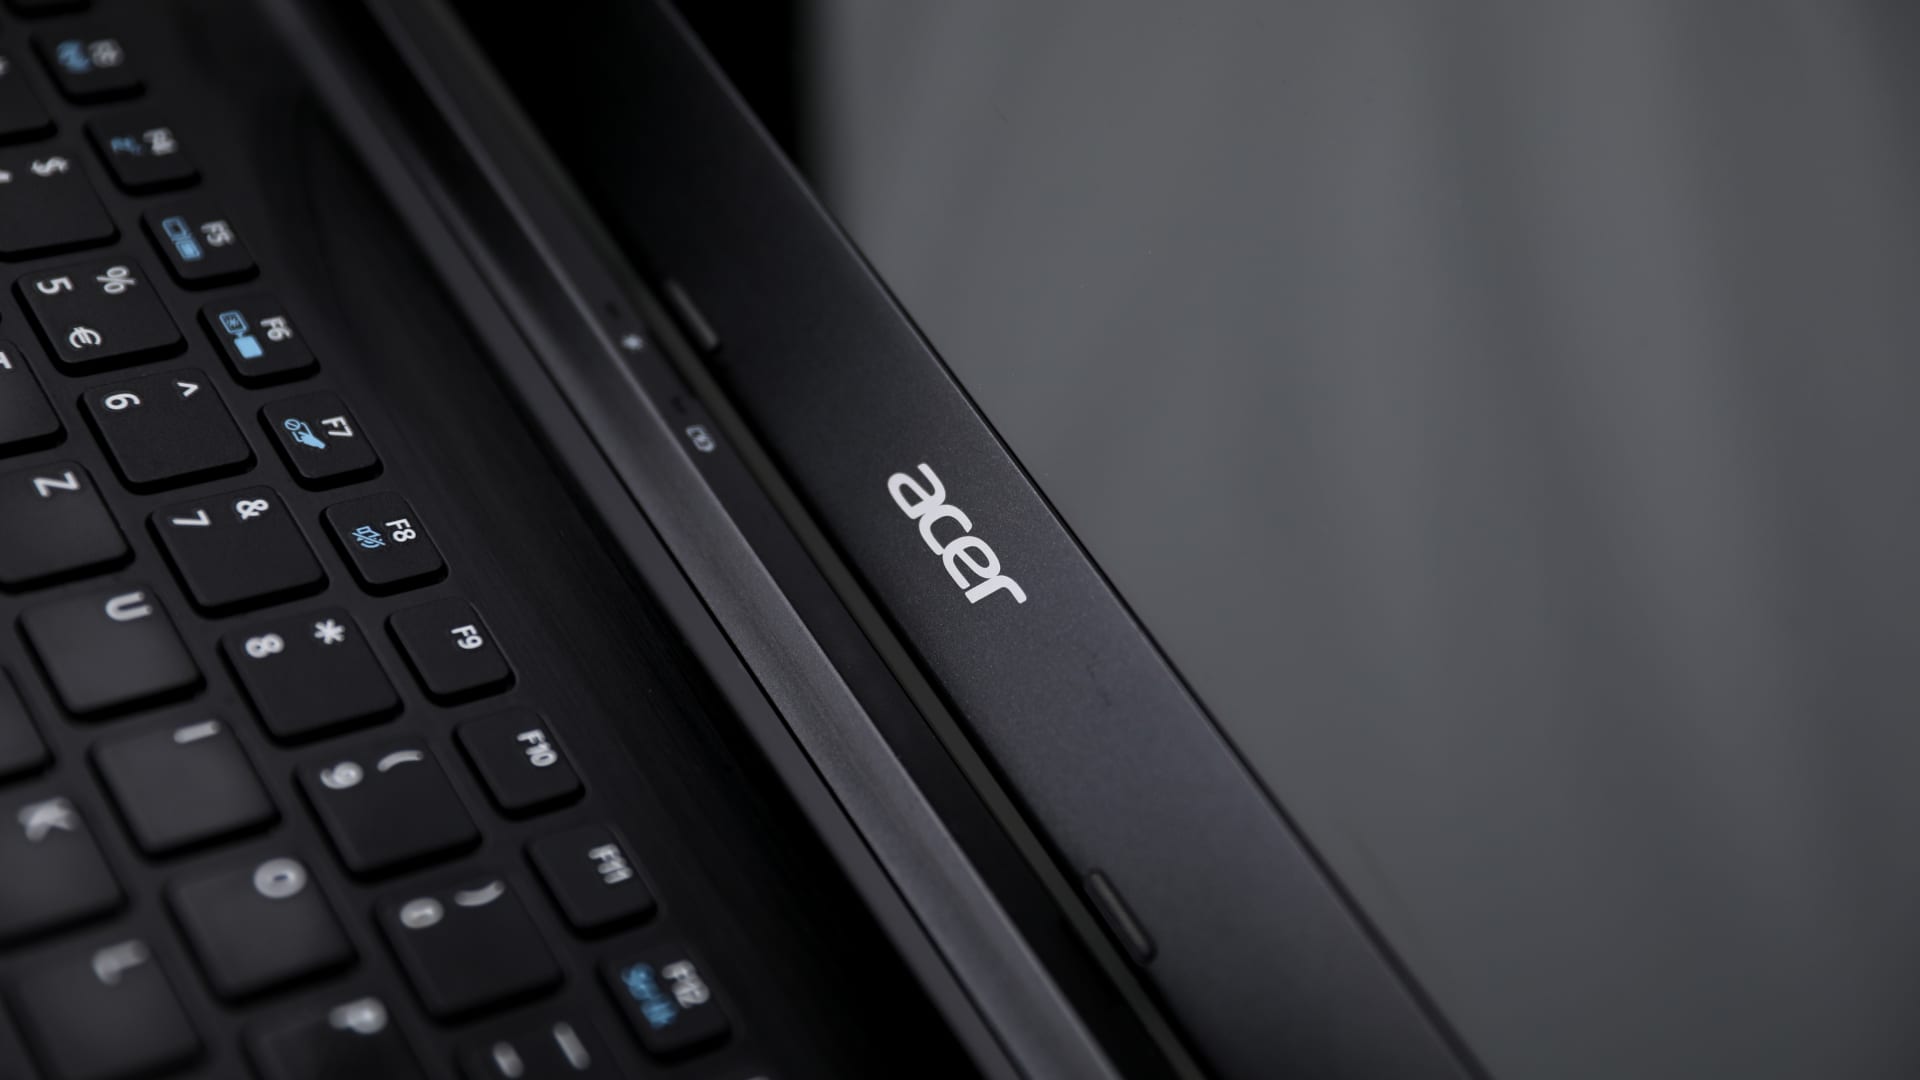 PC demand is back, says Acer CEO who sees robust growth in the ‘foreseeable future’